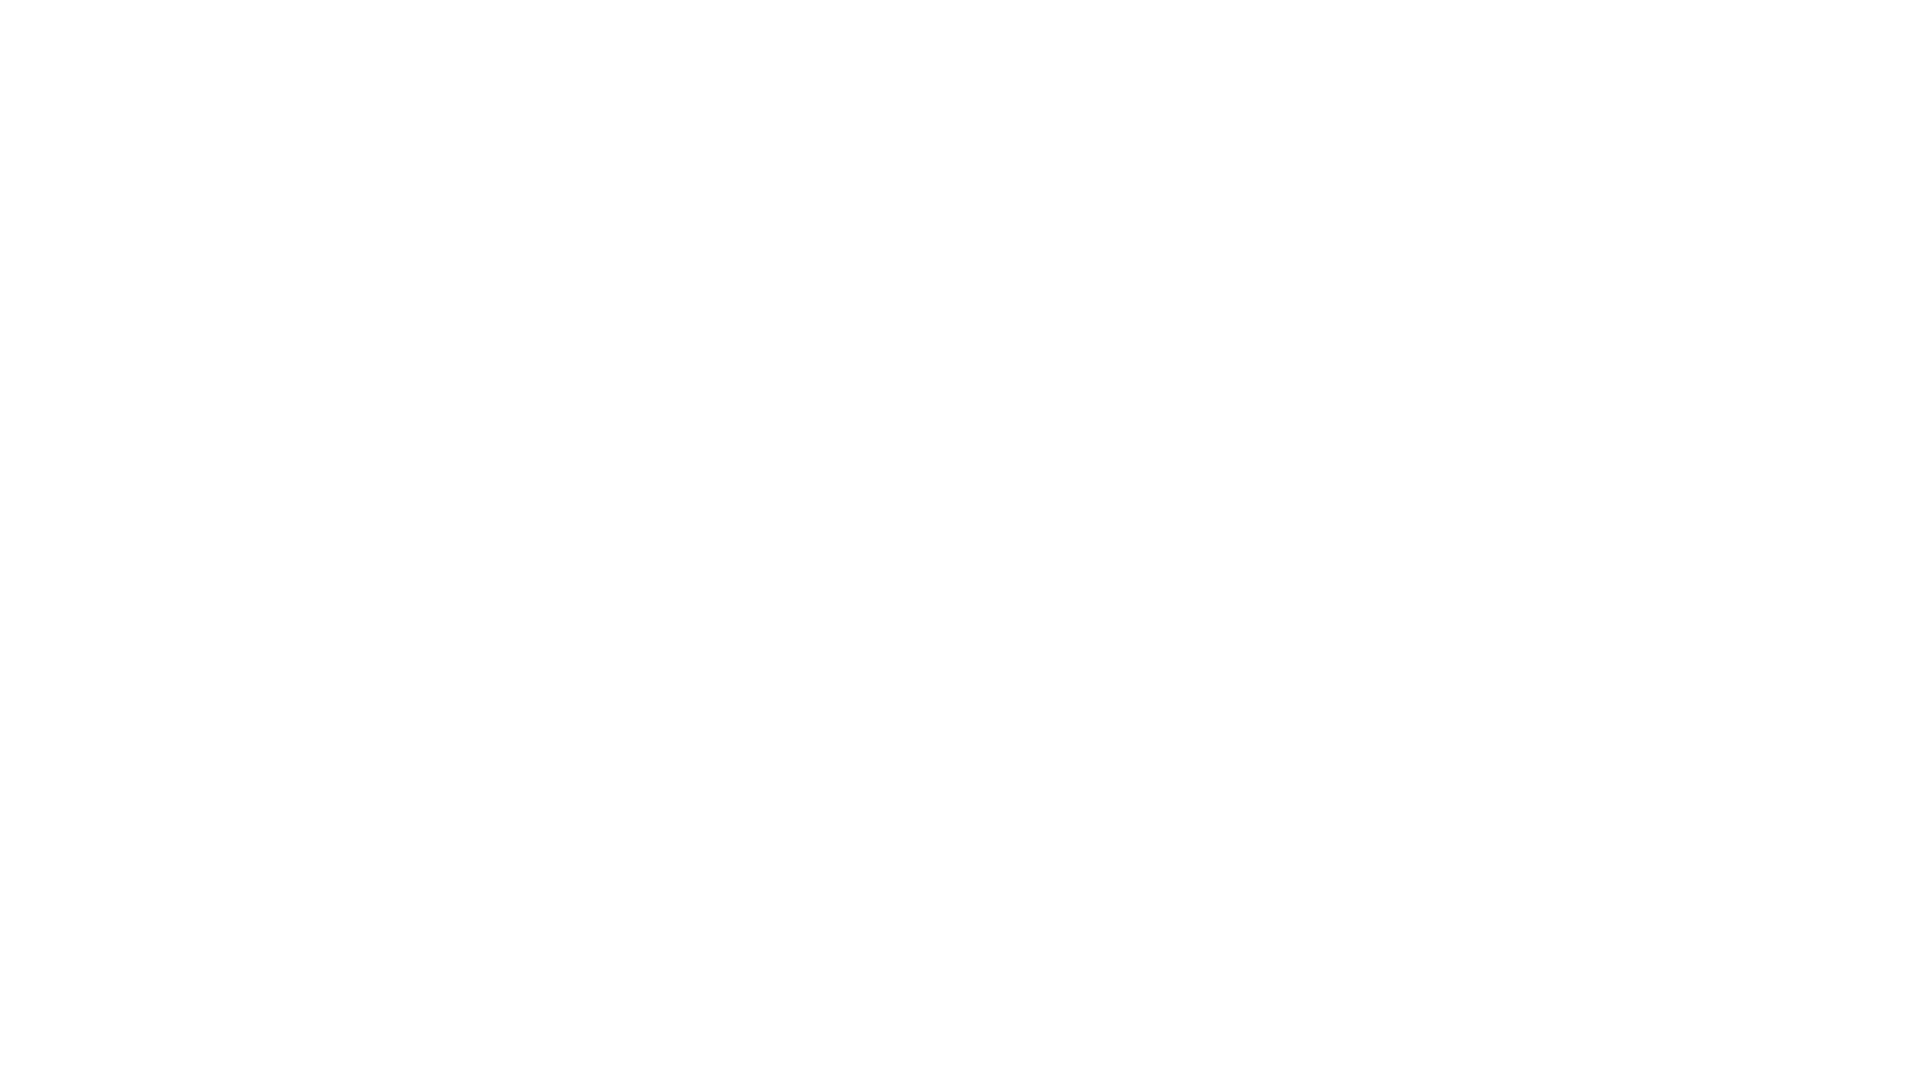 ZuPa Services